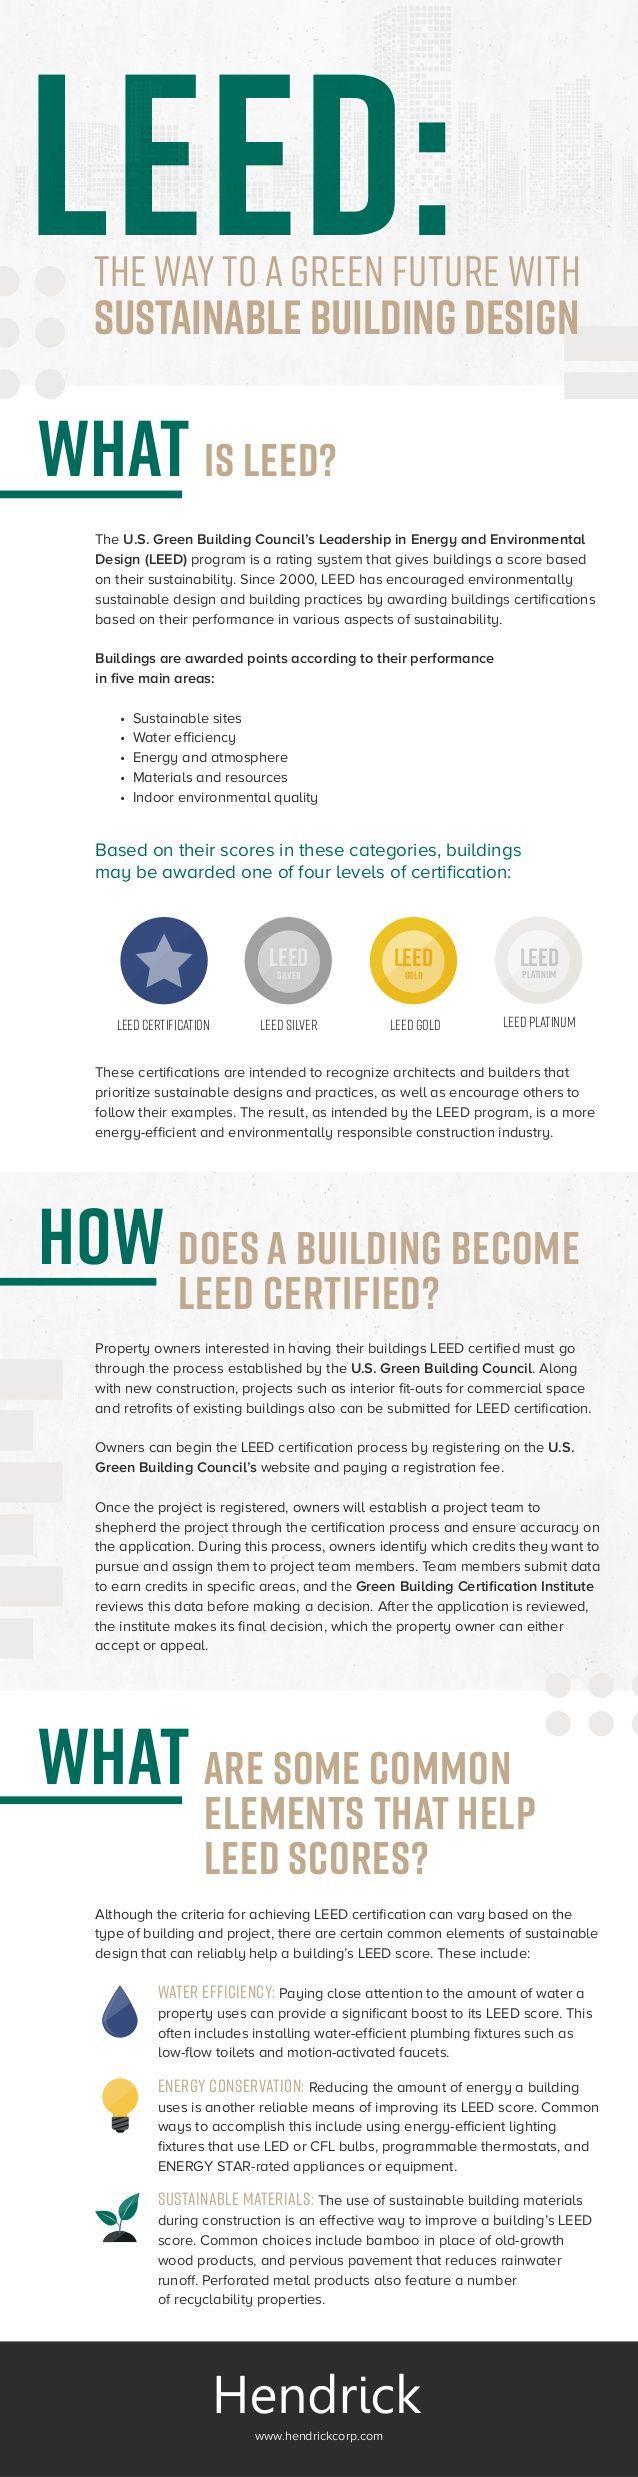 lead the way to a sustainble future with sustainable building design